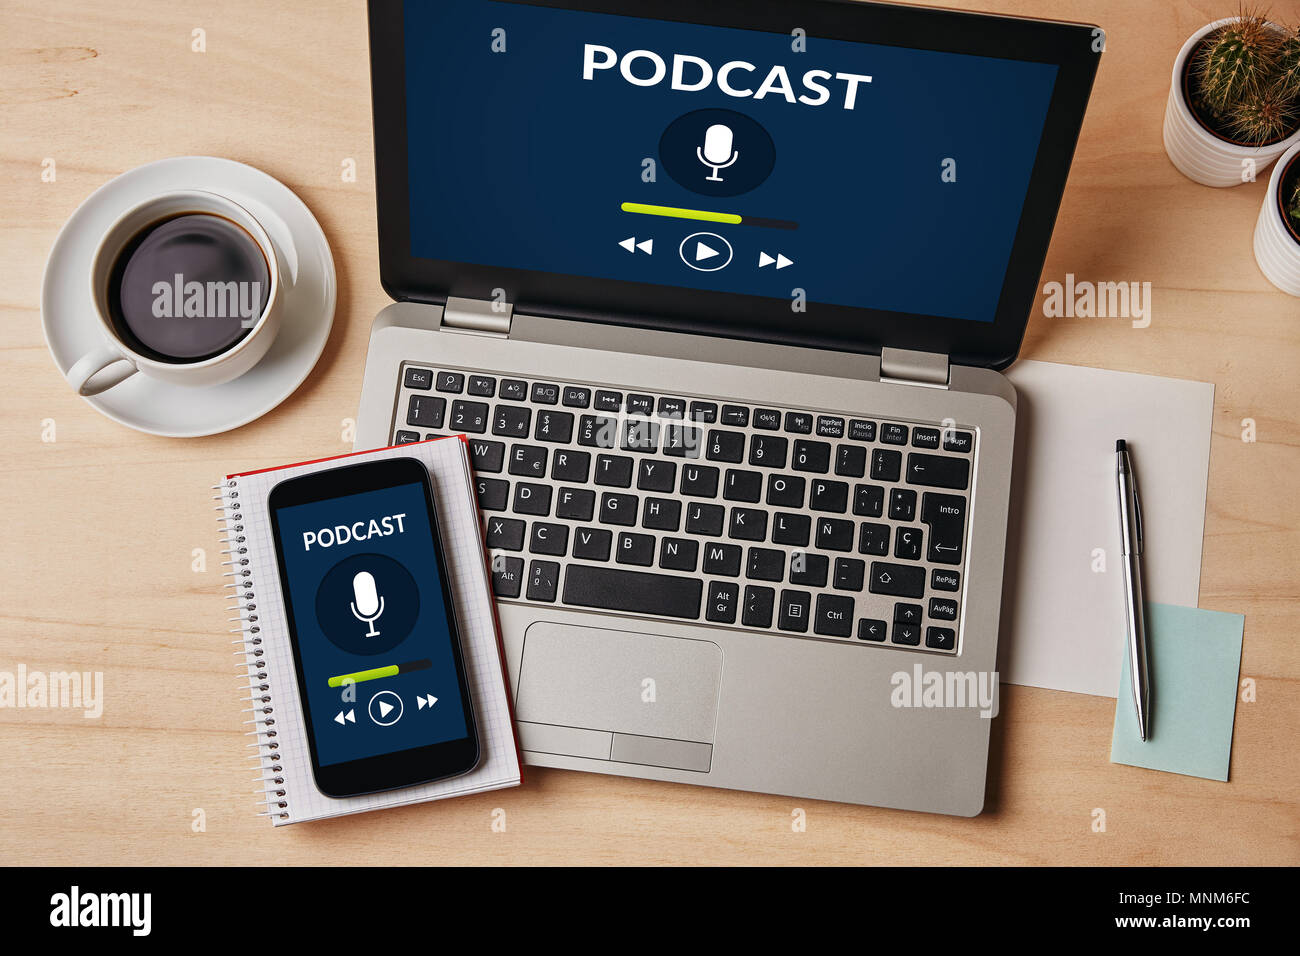 Podcast concept on laptop and smartphone screen over wooden table. All screen content is designed by me. Flat lay Stock Photo